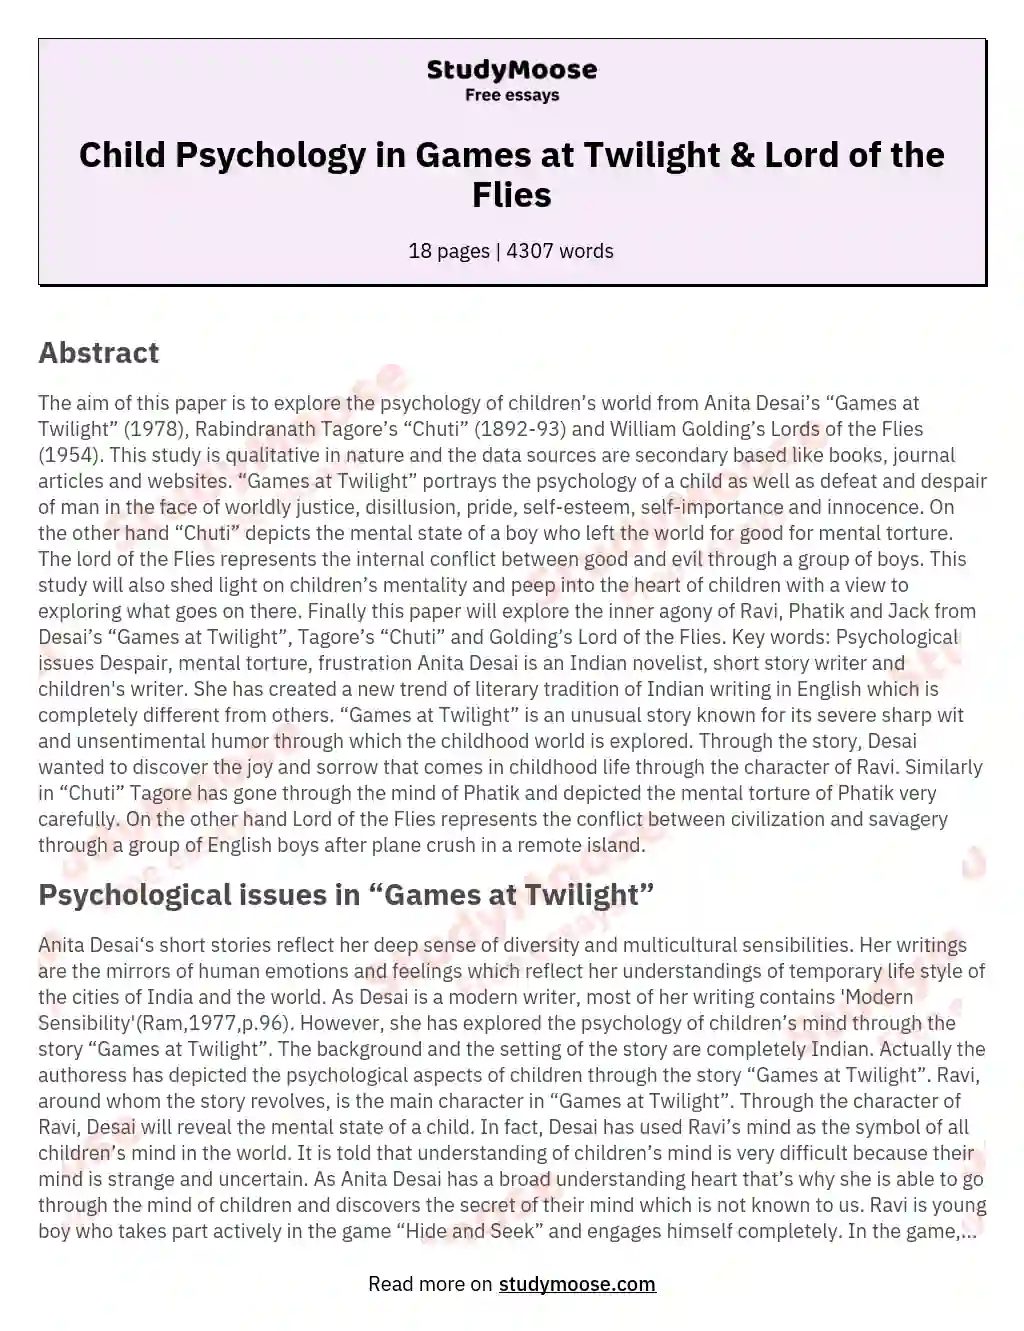 The Treatment of Child Psychology in “Games at Twilight”, “Chuti” and "Lord of the Flies"